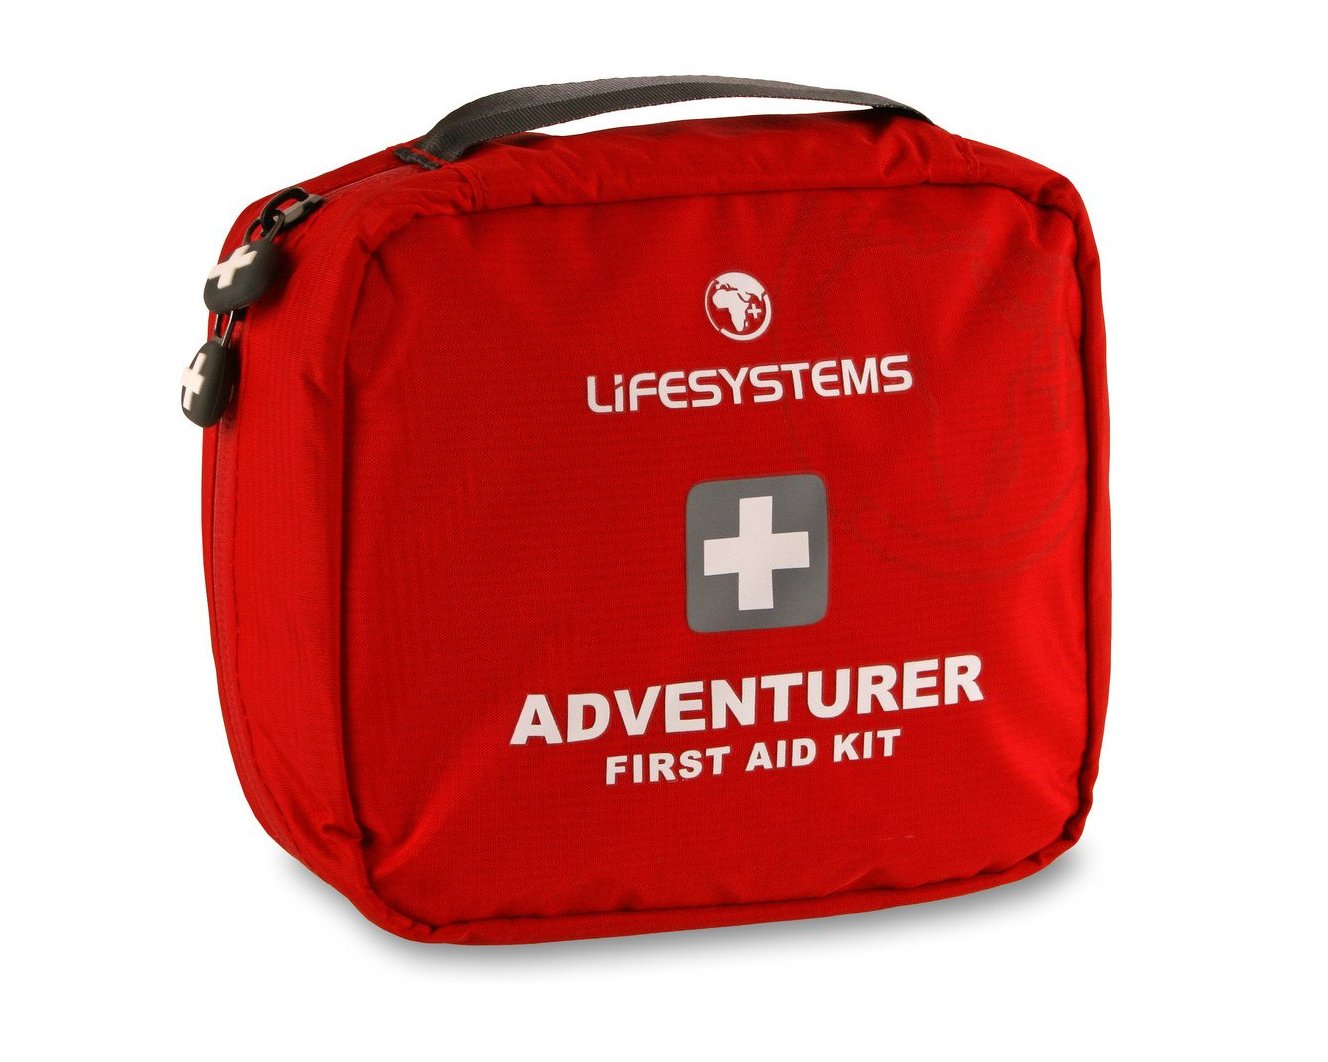 Lifesystems Adventure First Aid Kit | Hiking and Camping Gear | NZ